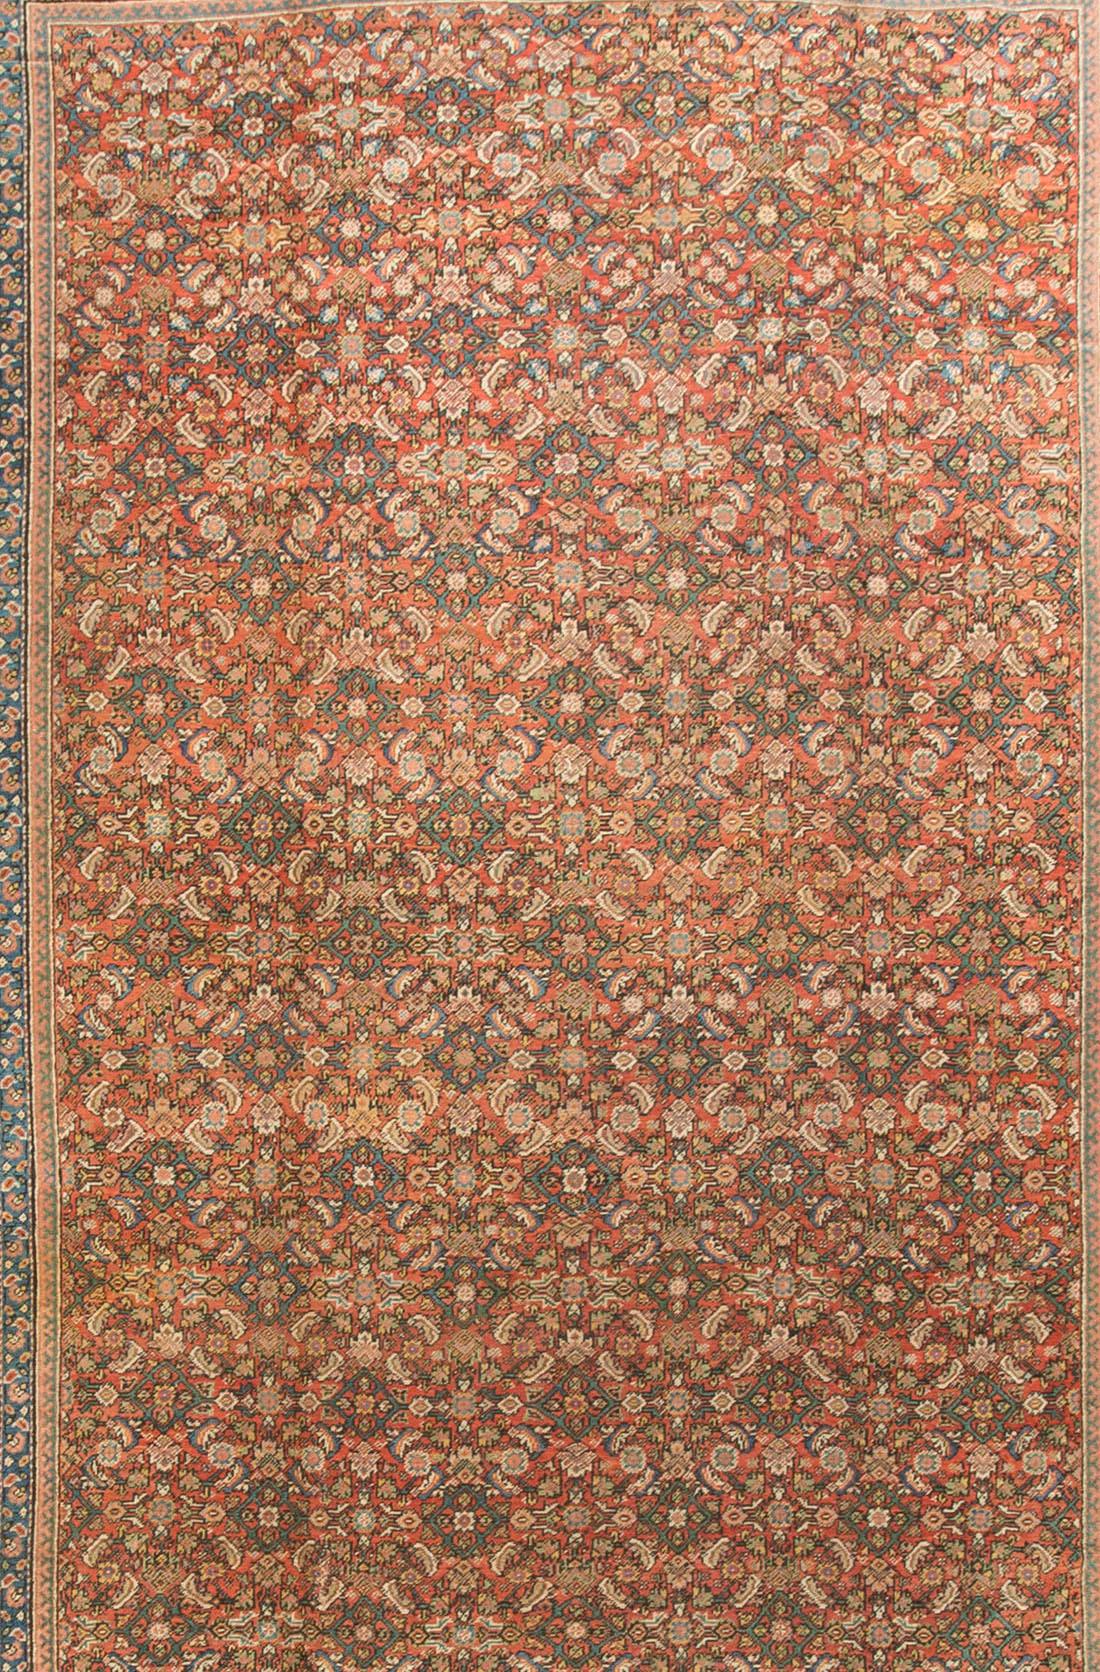 Antique Persian Sultanabad Rug circa 1900 In Good Condition For Sale In Secaucus, NJ